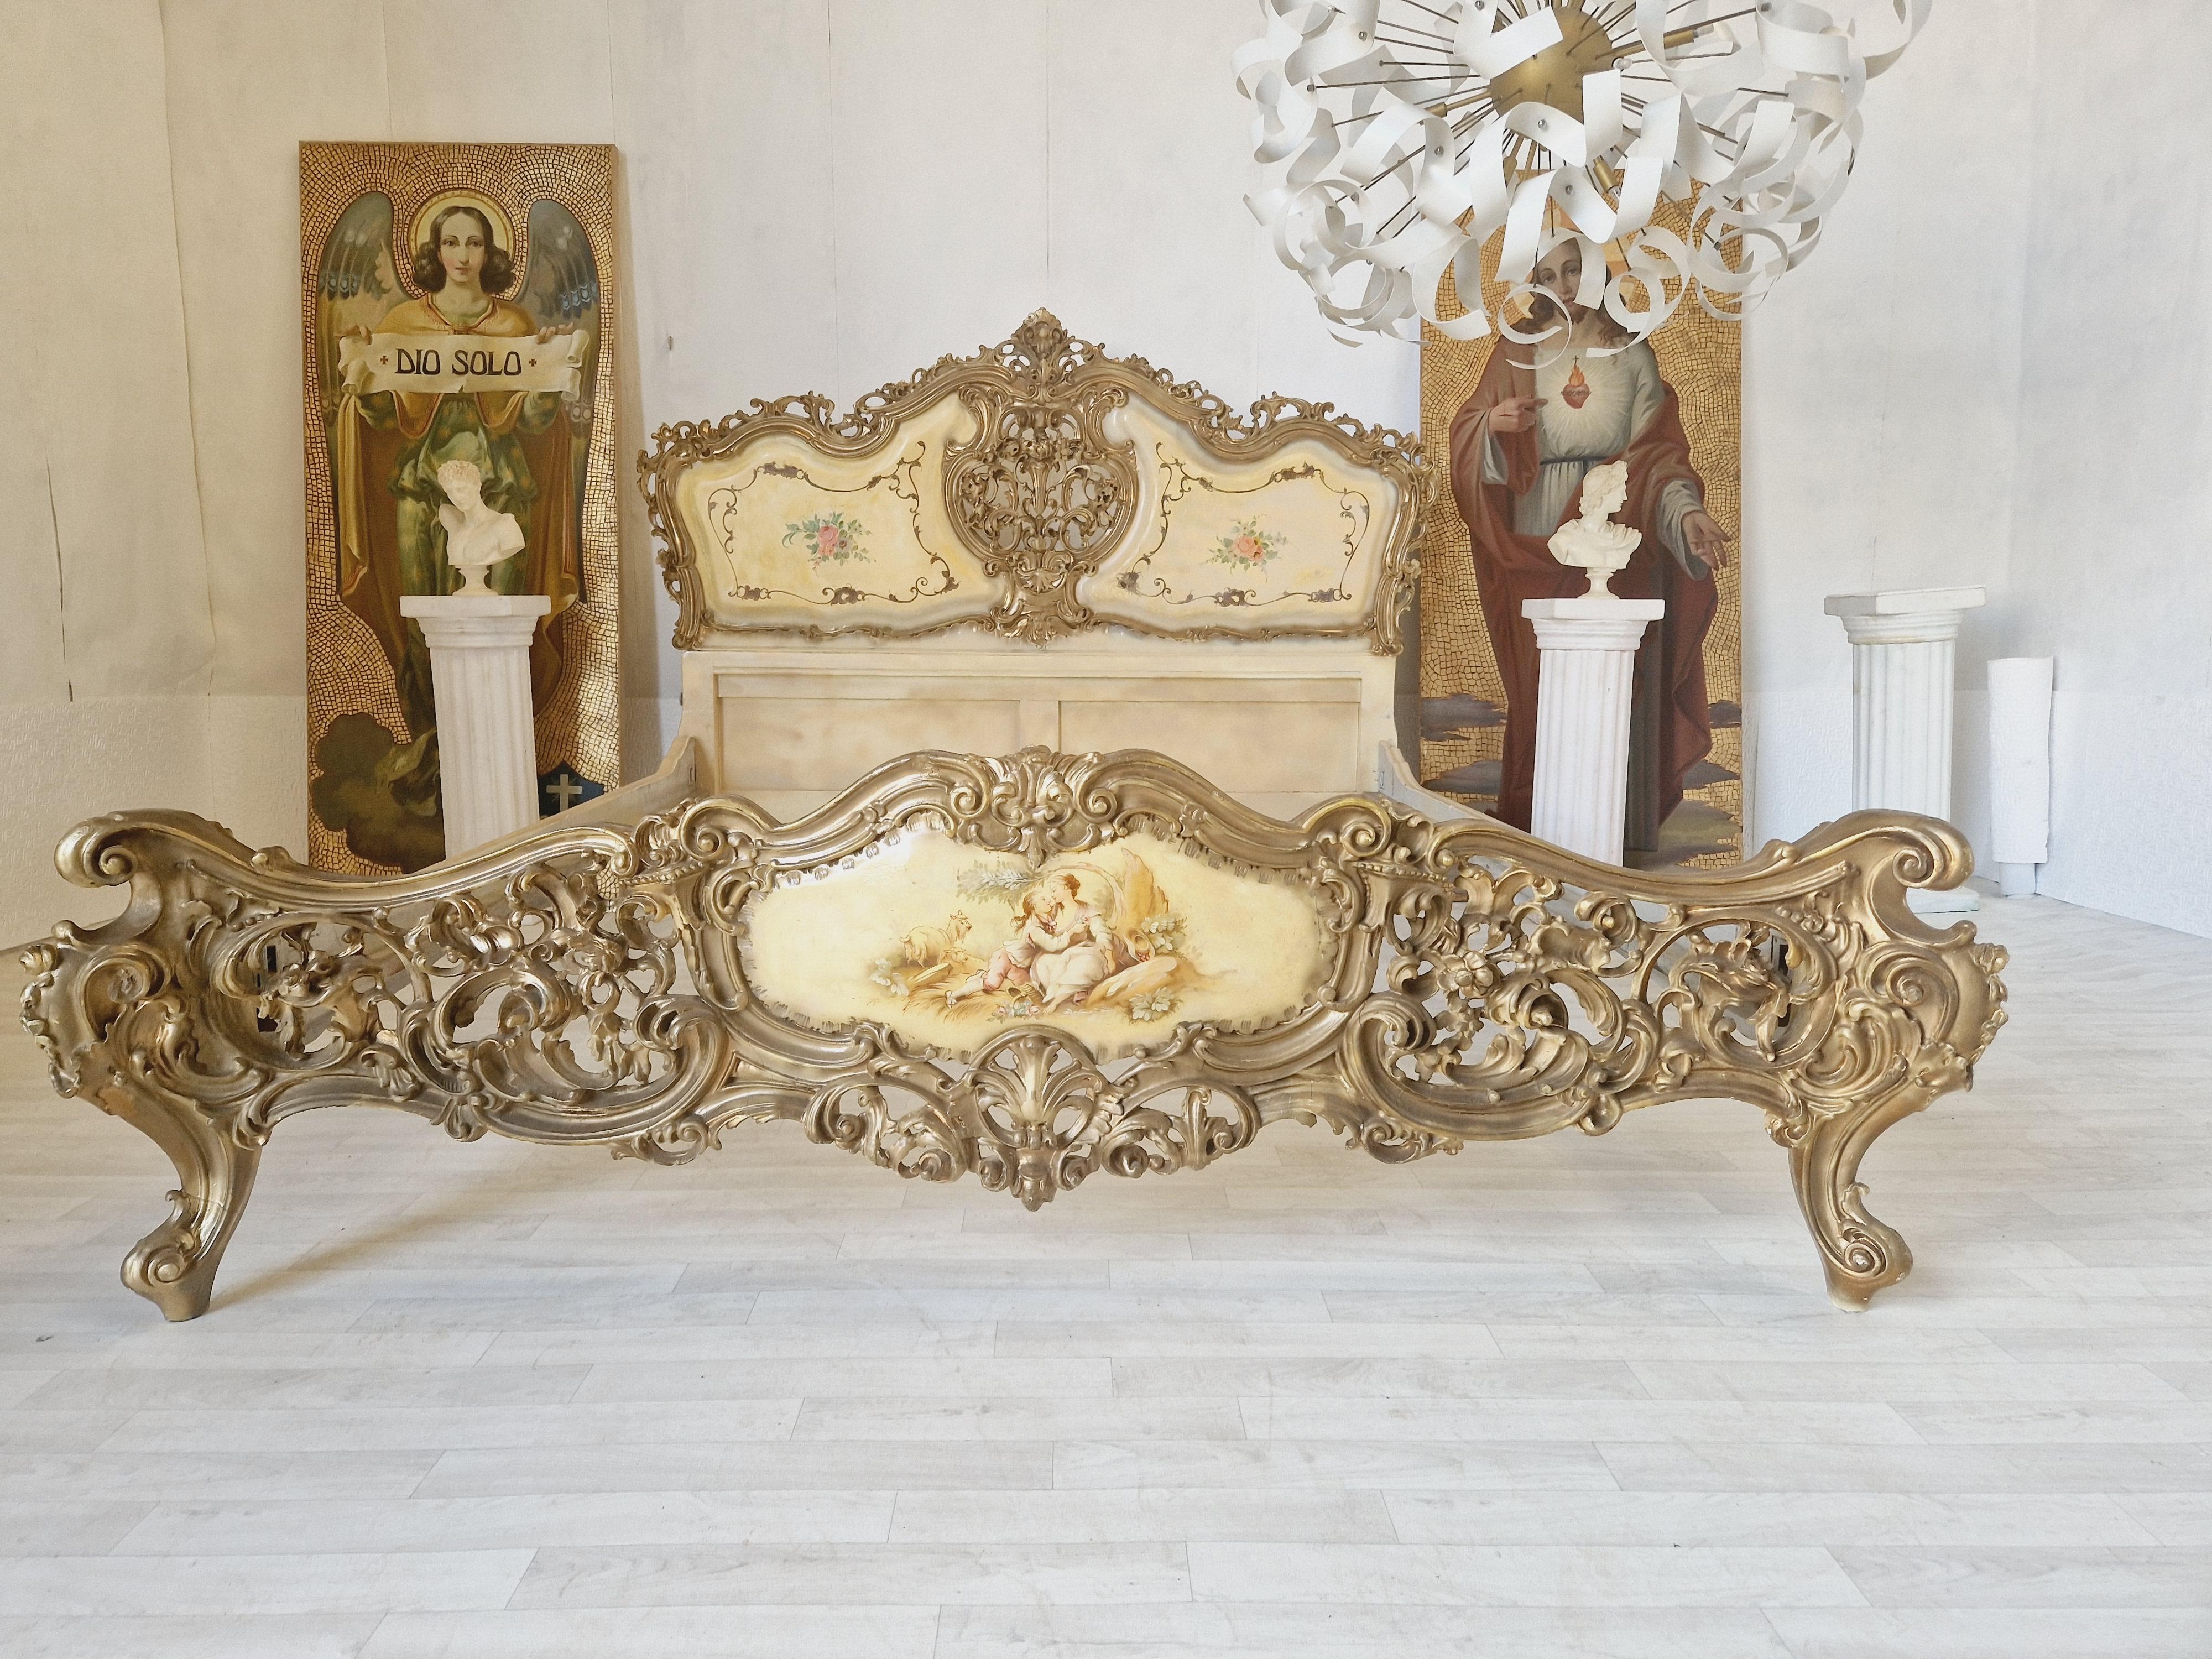 This beautiful antique bed from Italy is a masterpiece that will add elegance and sophistication to any bedroom. Crafted in the Venetian style, this rectangular-shaped bed features exquisite carvings and a stunning gold-painted finish. The headboard